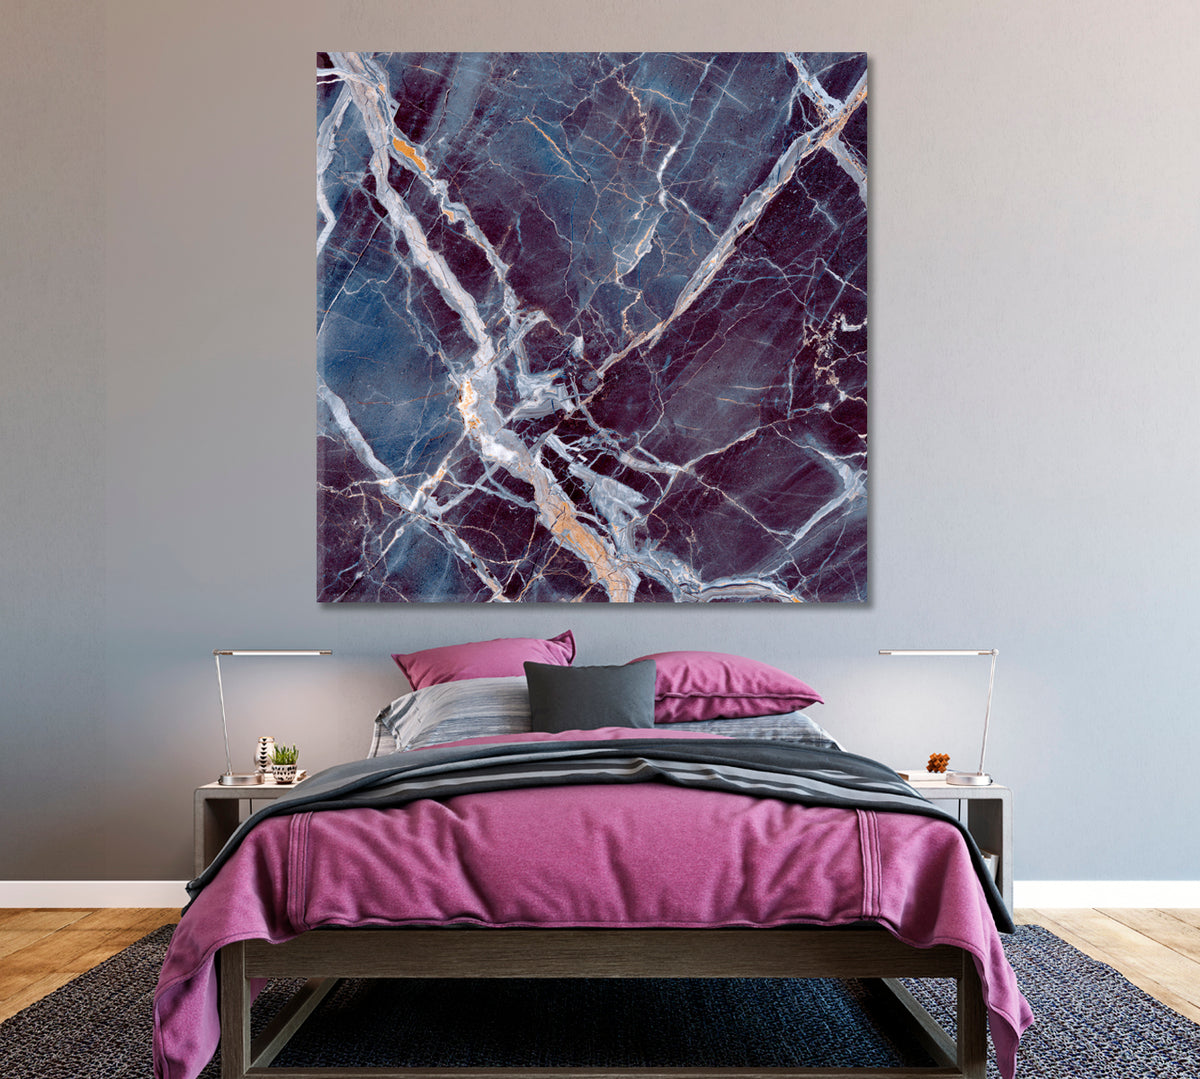 Marble Stone with Veins Canvas Print ArtLexy 1 Panel 12"x12" inches 